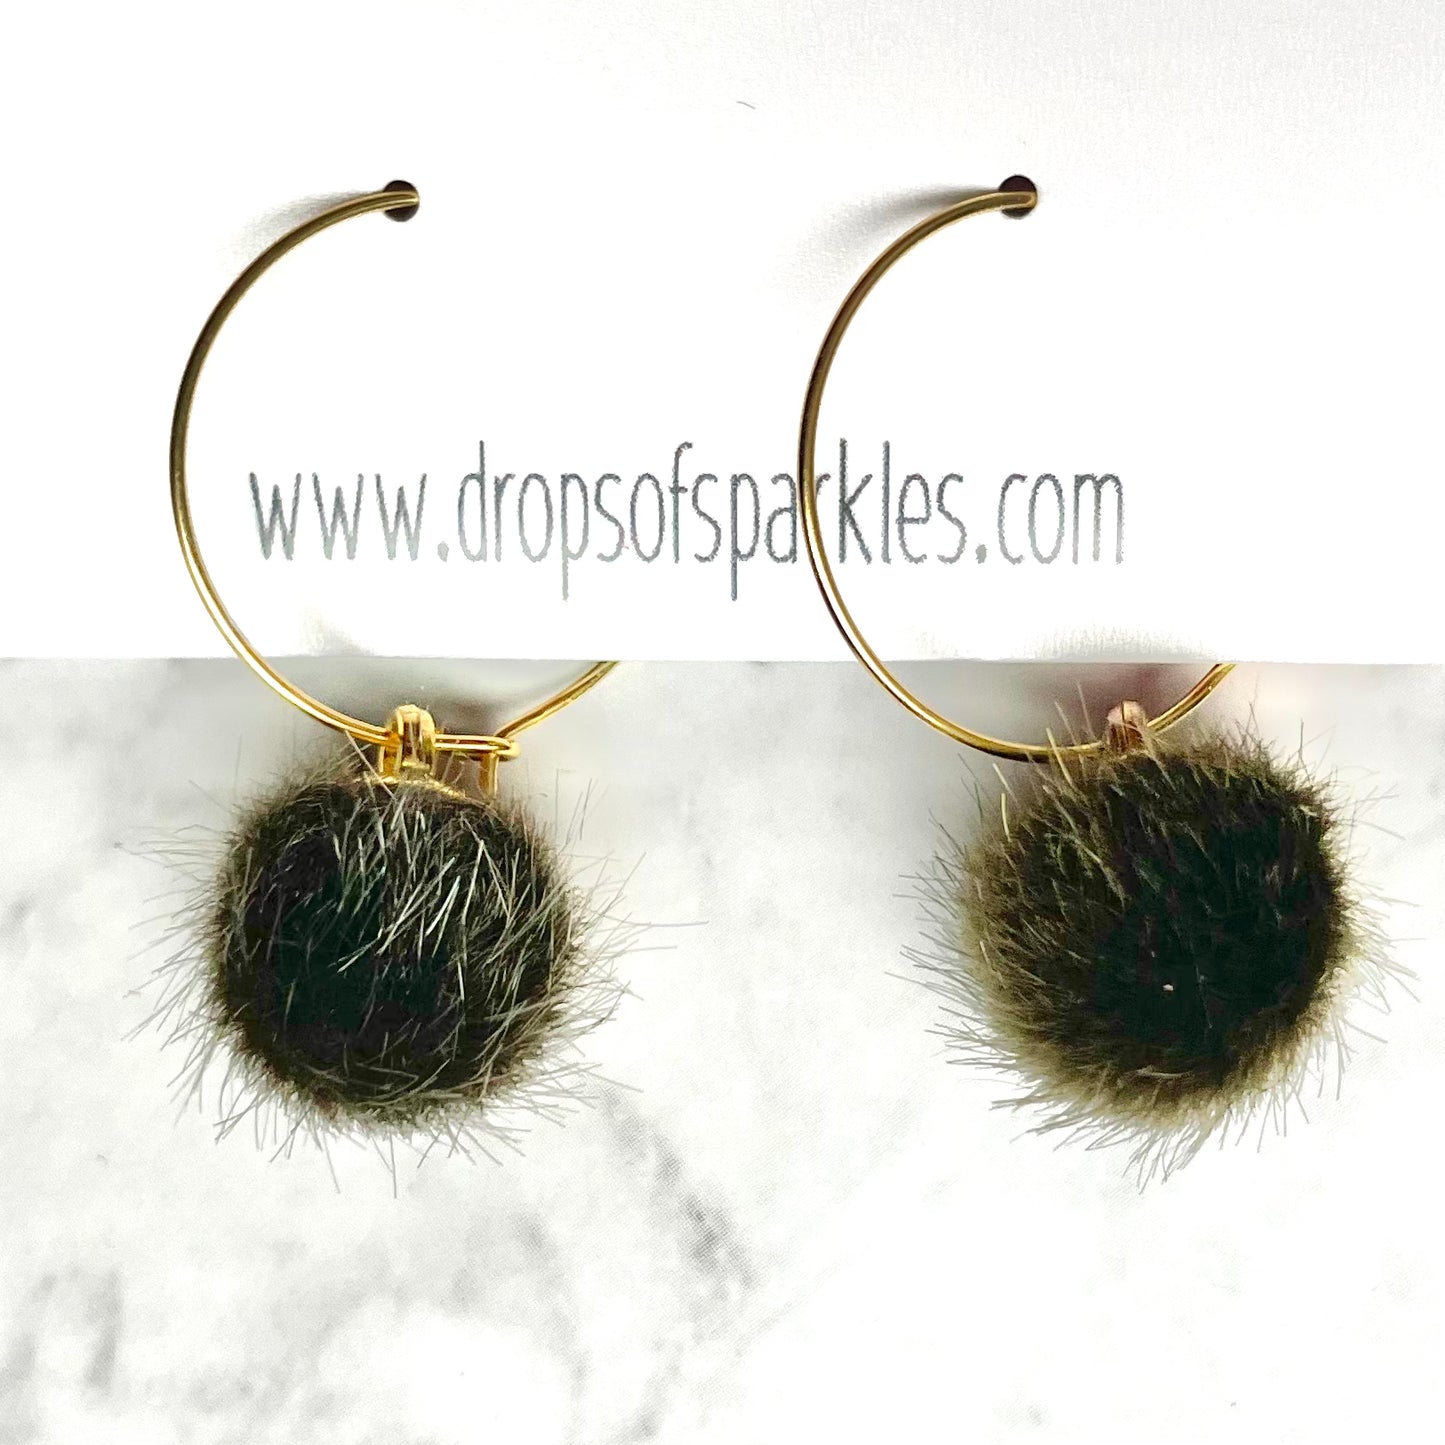 20mm round 24k shiny gold plated  "hoops" with fun little olive green fuzzy pom poms attached